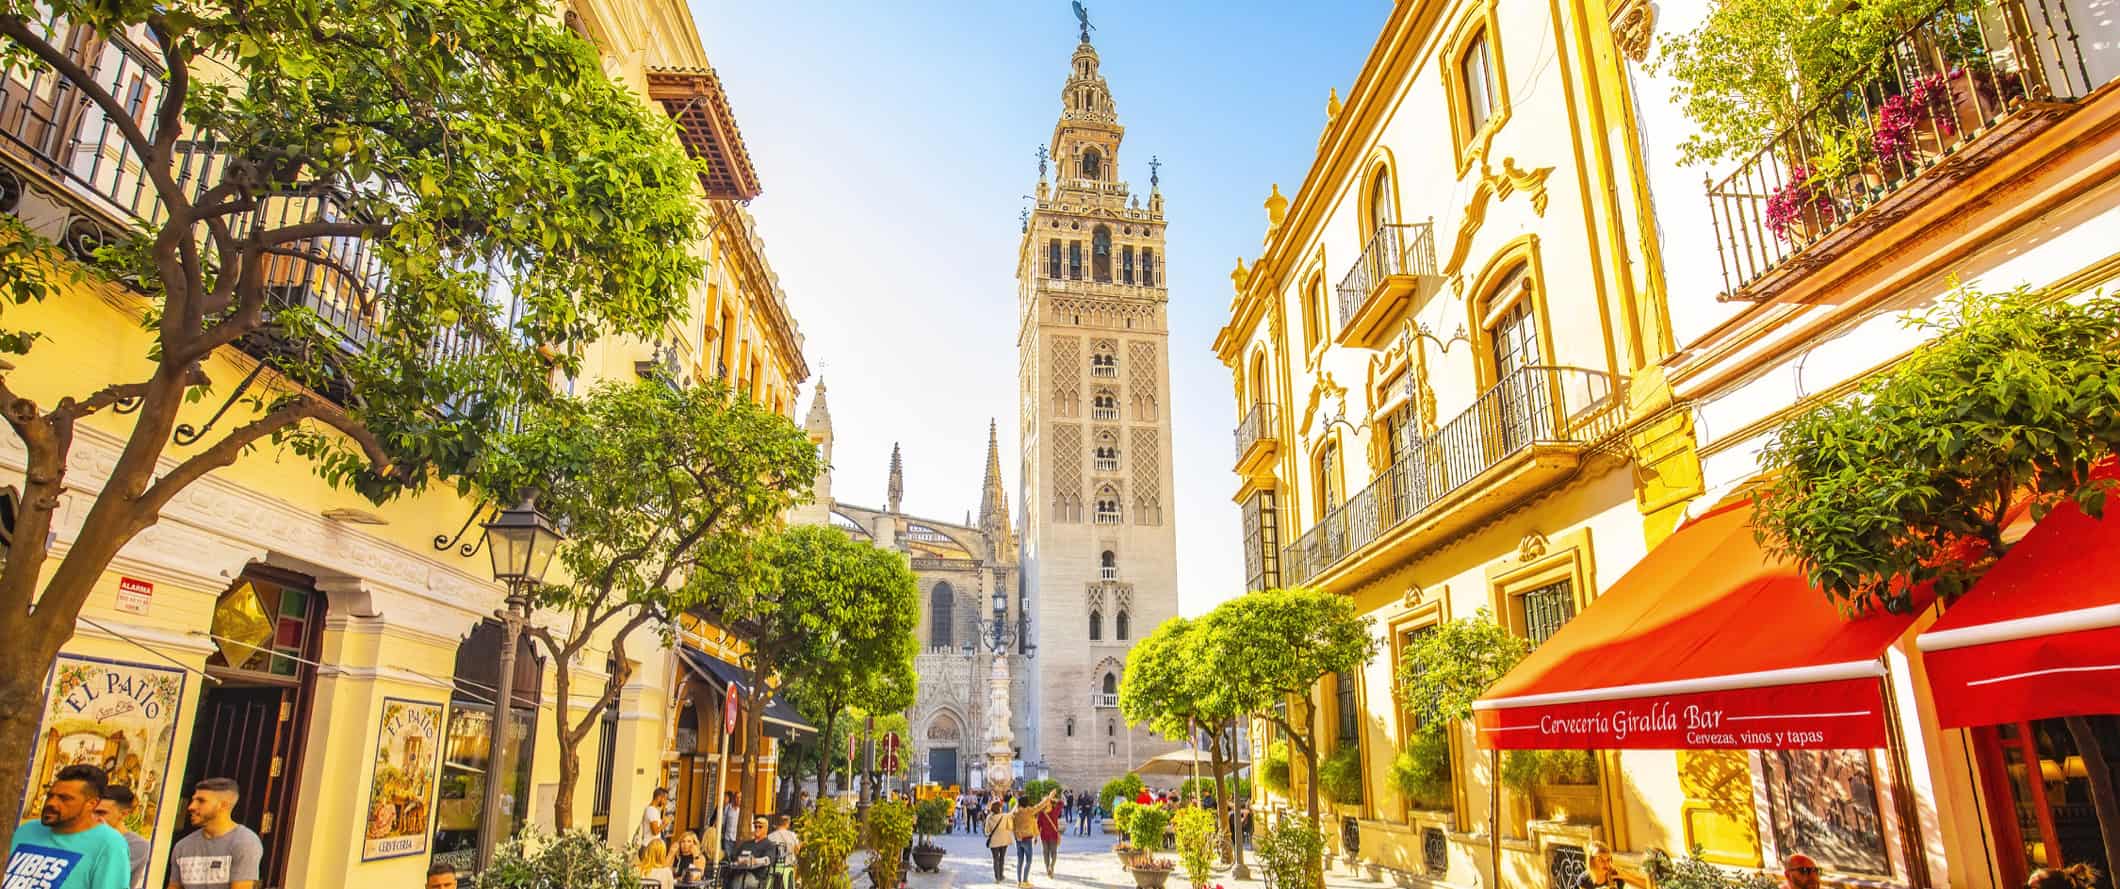 The charming, historic streets of sunny Seville, Spain